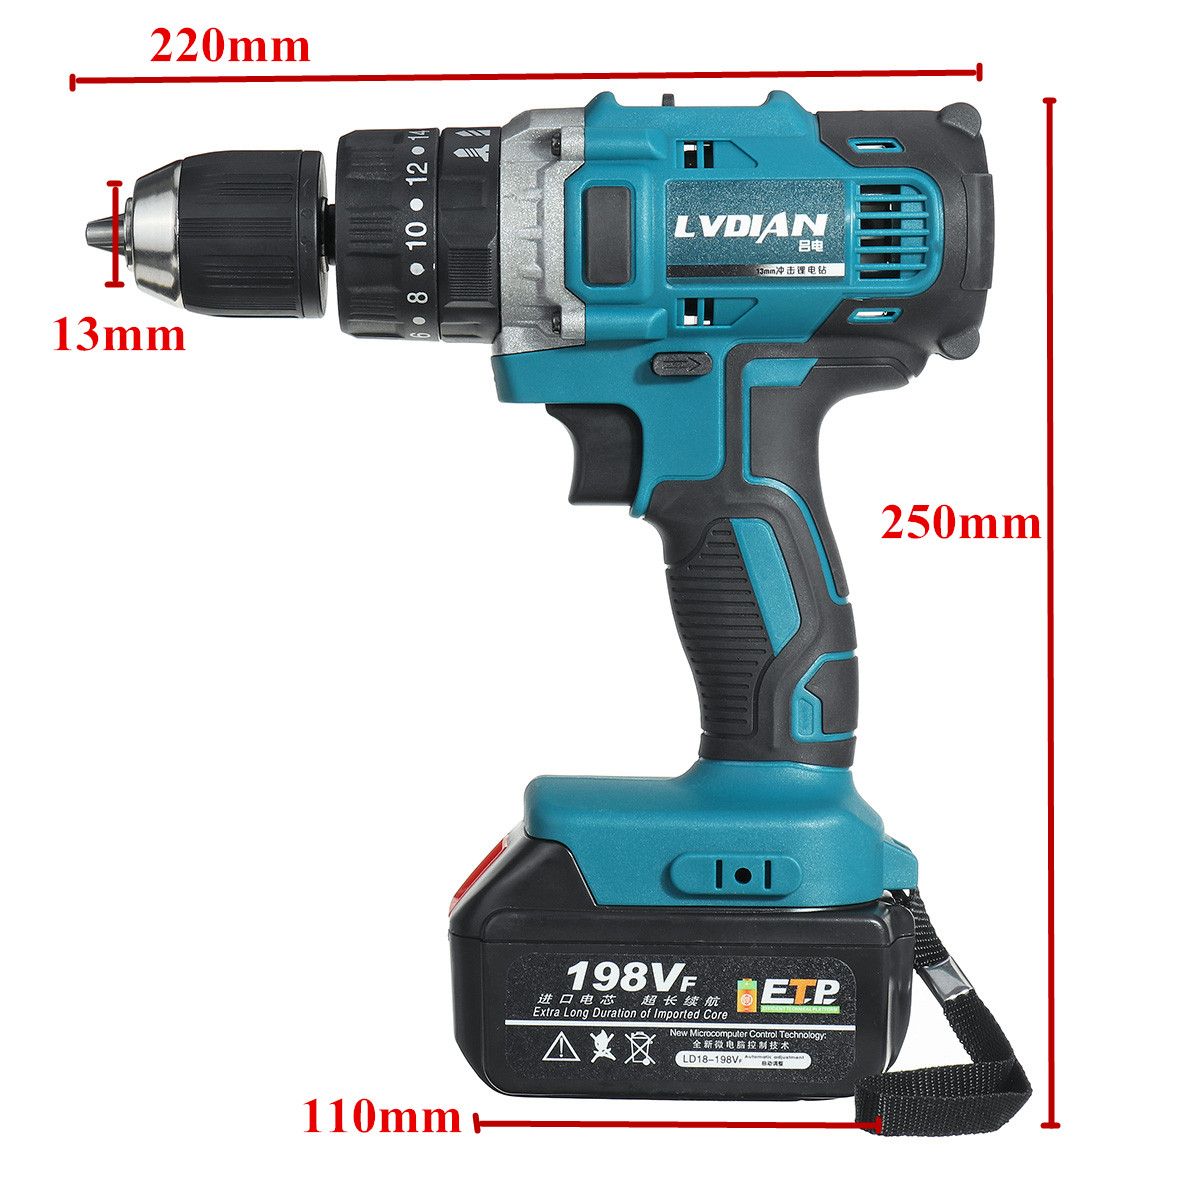 110-240V-198VF-203-Torque-Cordless-Impact-Electric-Drill-Flat-Drill-Hammer-Screwdriver-3-in-1-1612524